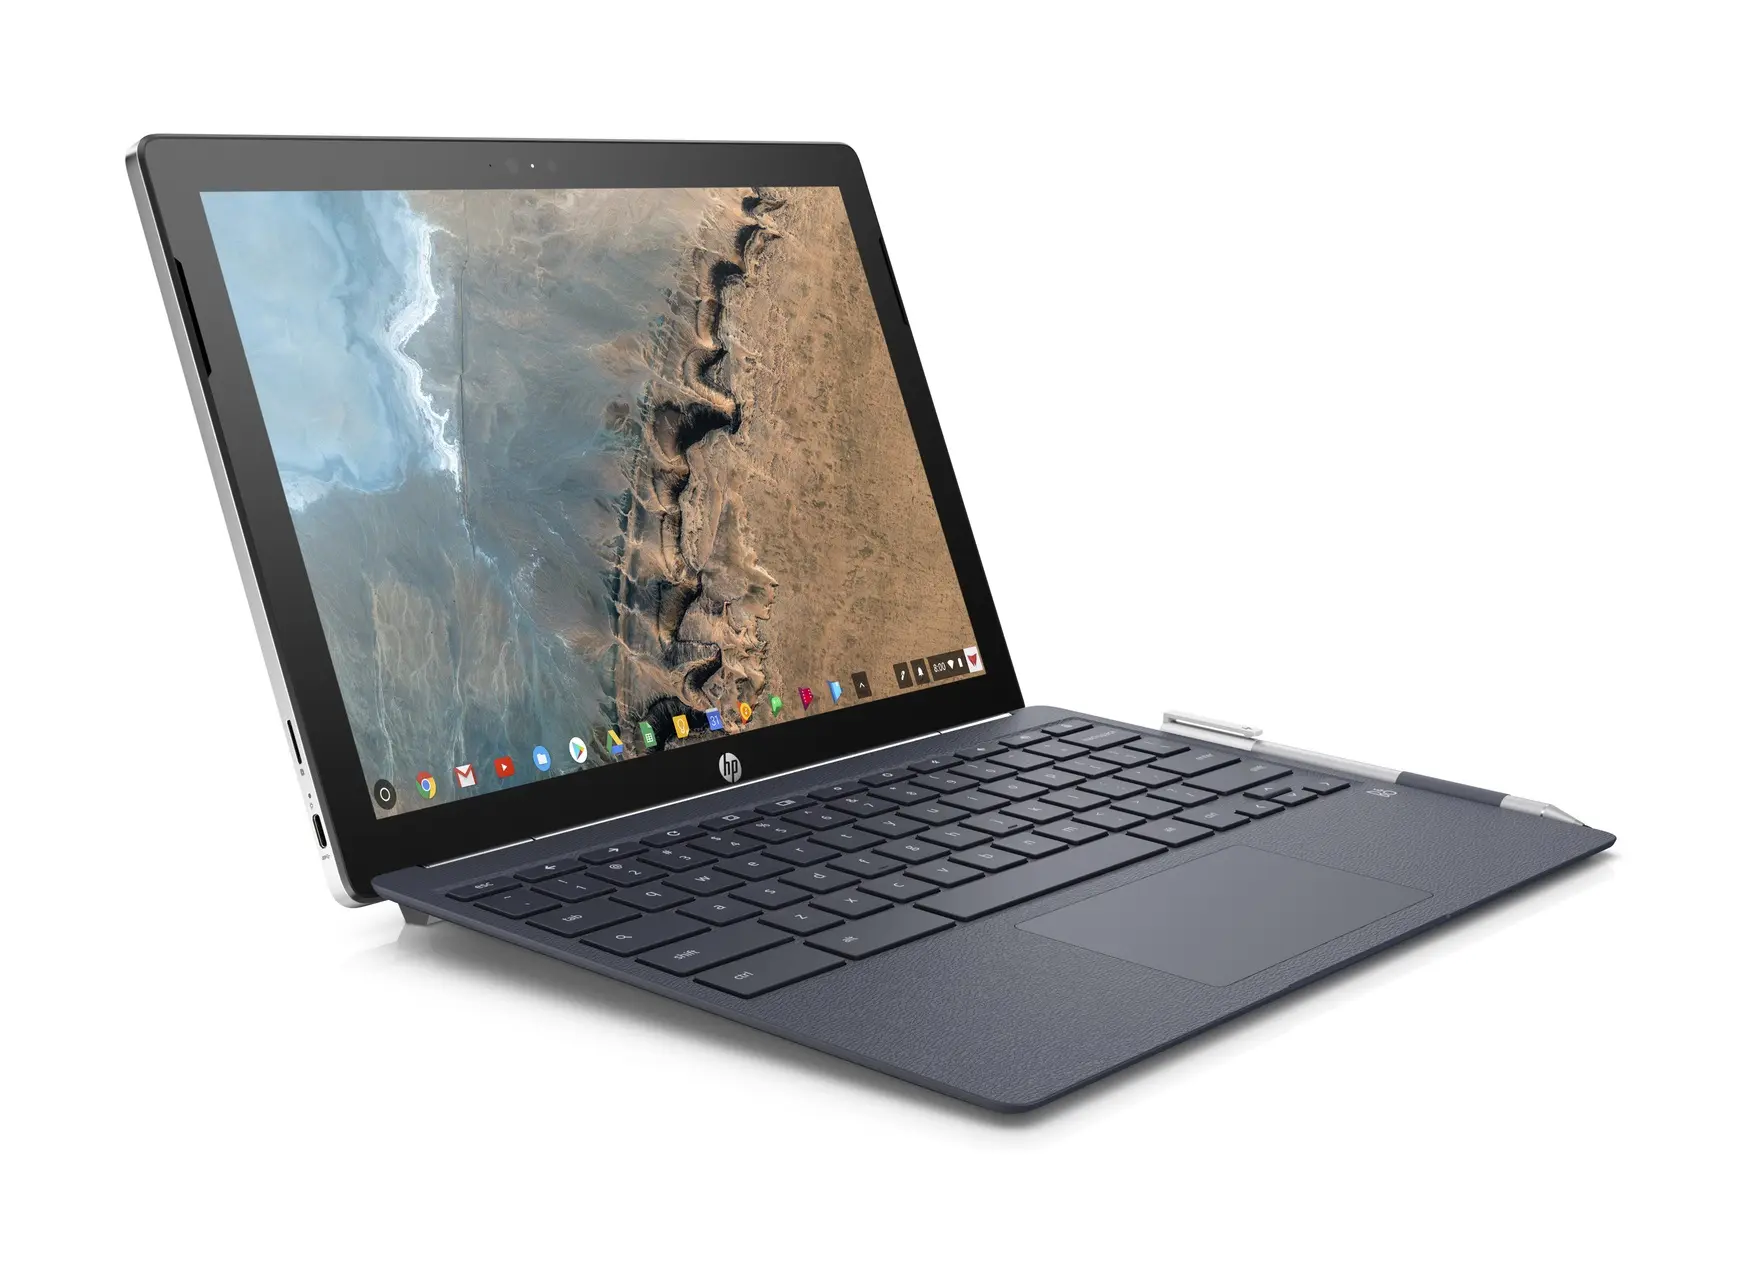 hewlett packard chromebook x2 - Does the HP Chromebook x2 come with a stylus